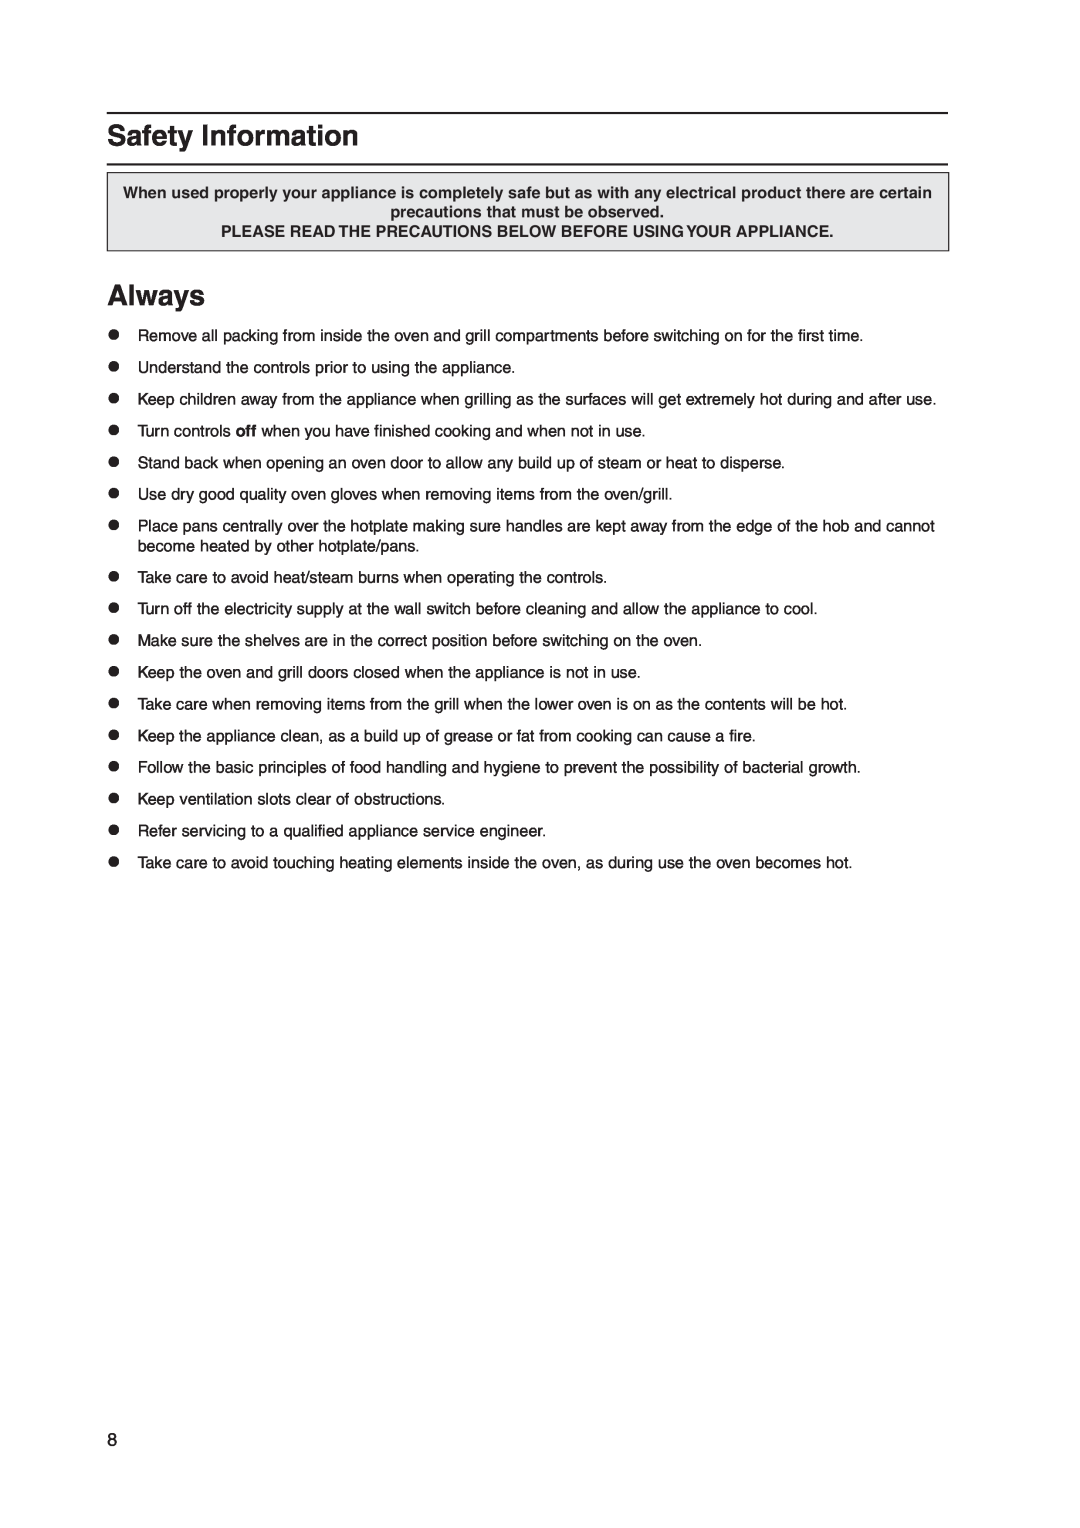 Indesit KD3G11/G manual Safety Information, Always, precautions that must be observed 